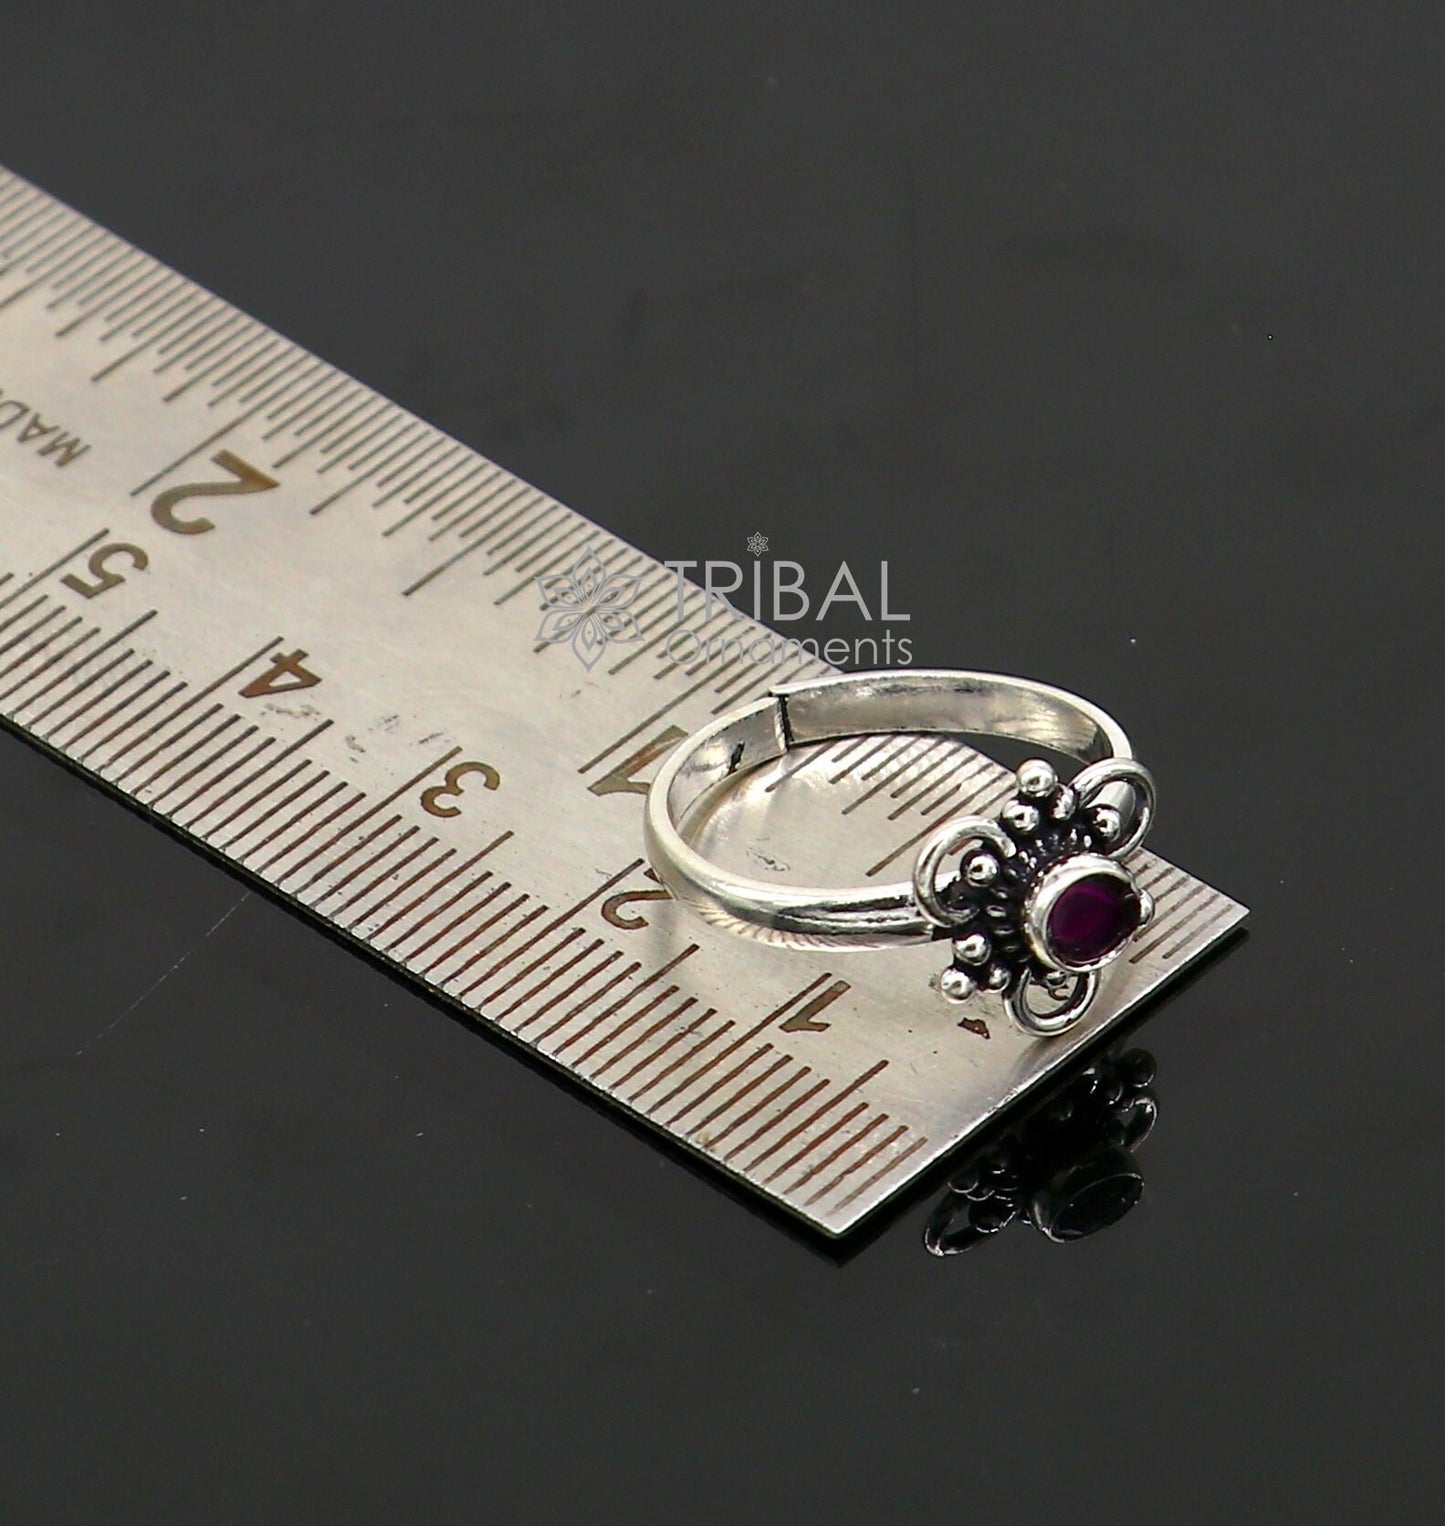 925 sterling silver adjustable size toe ring band red stone tribal belly dance ethnic cultural  jewelry from india ntr90 - TRIBAL ORNAMENTS